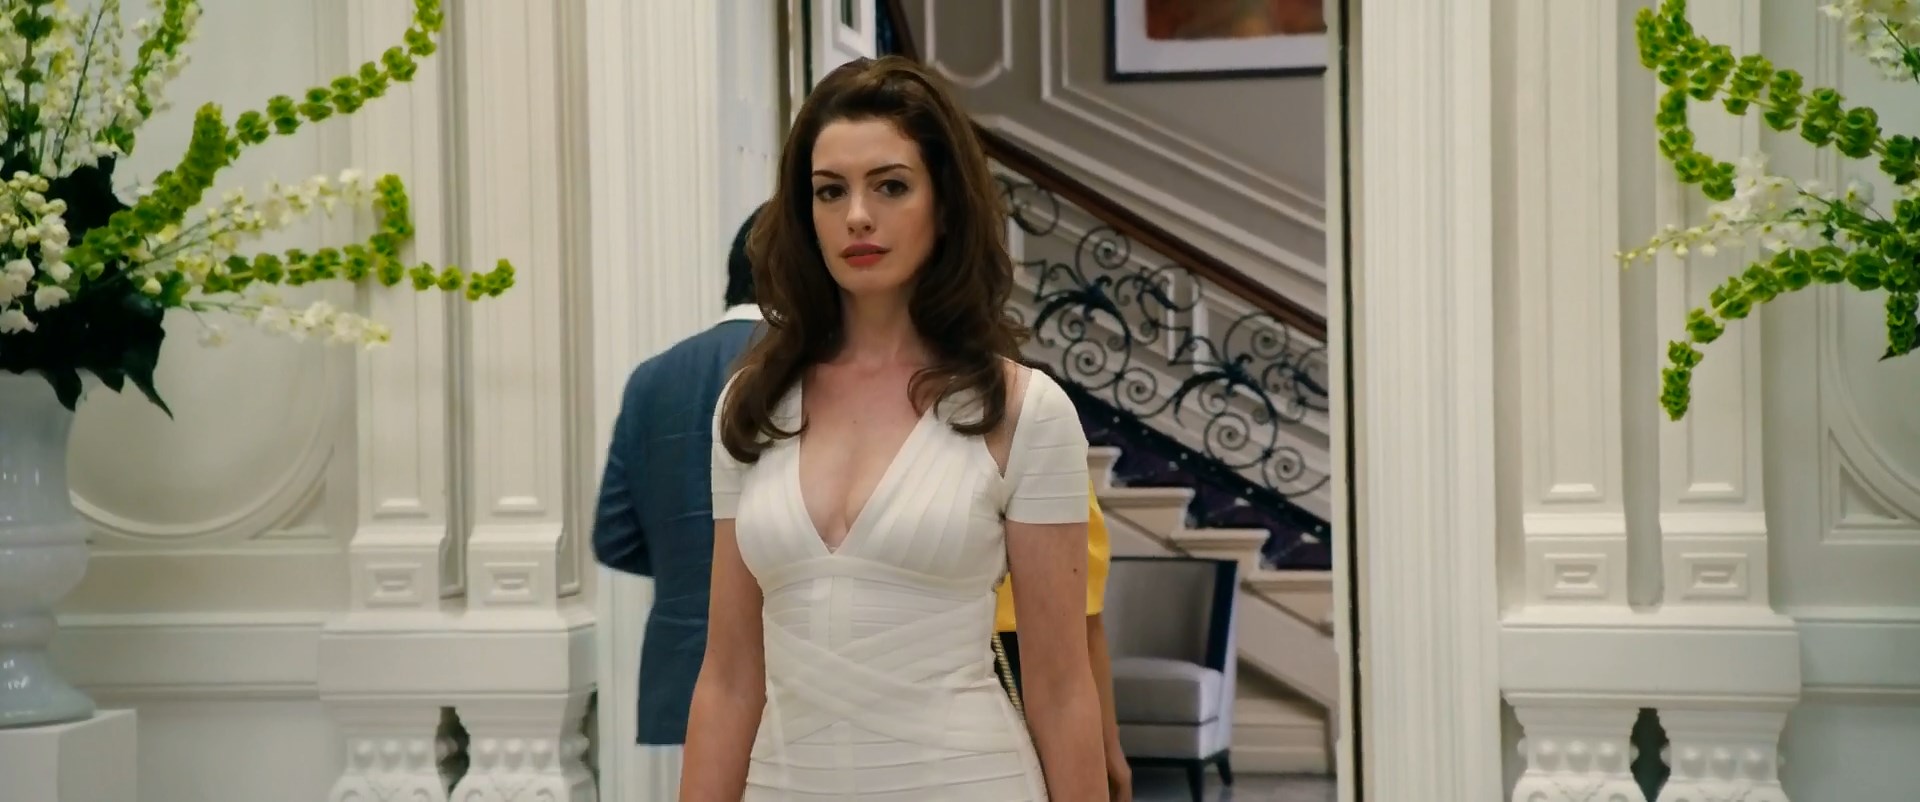 Anne Hathaway sexy - The Hustle (2019)